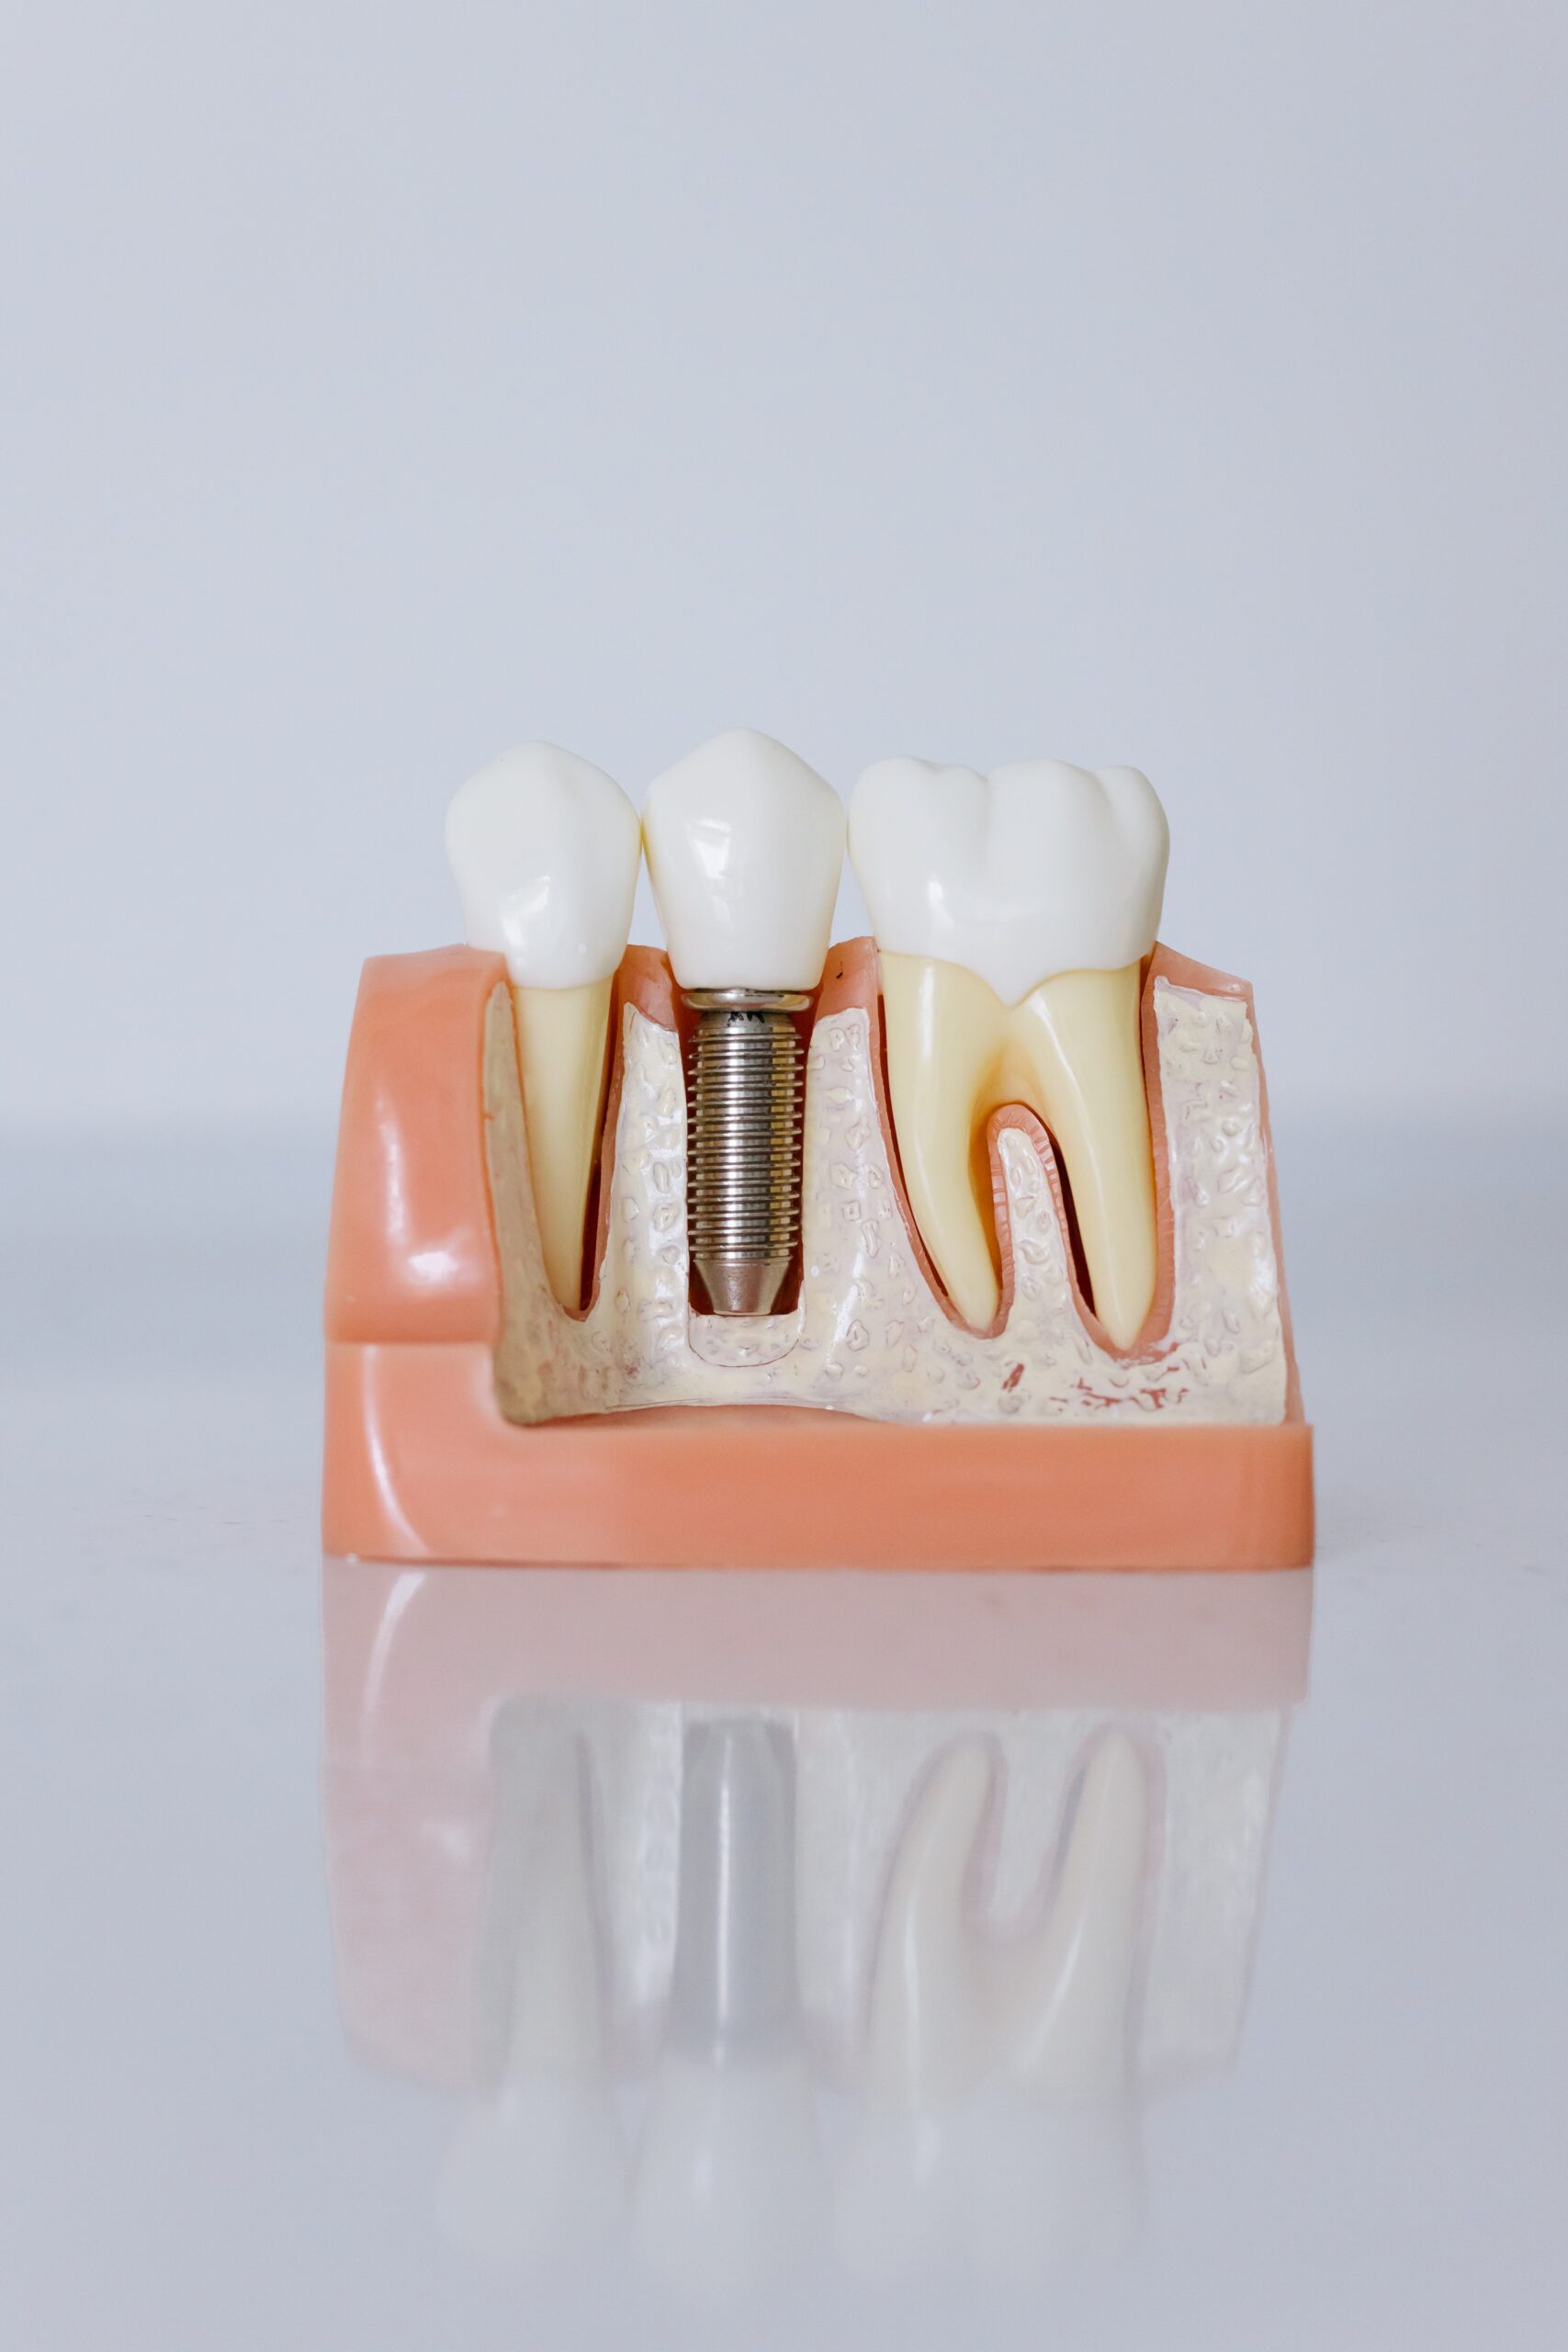 The Complete Guide to Choosing Dentures: Everything to Know